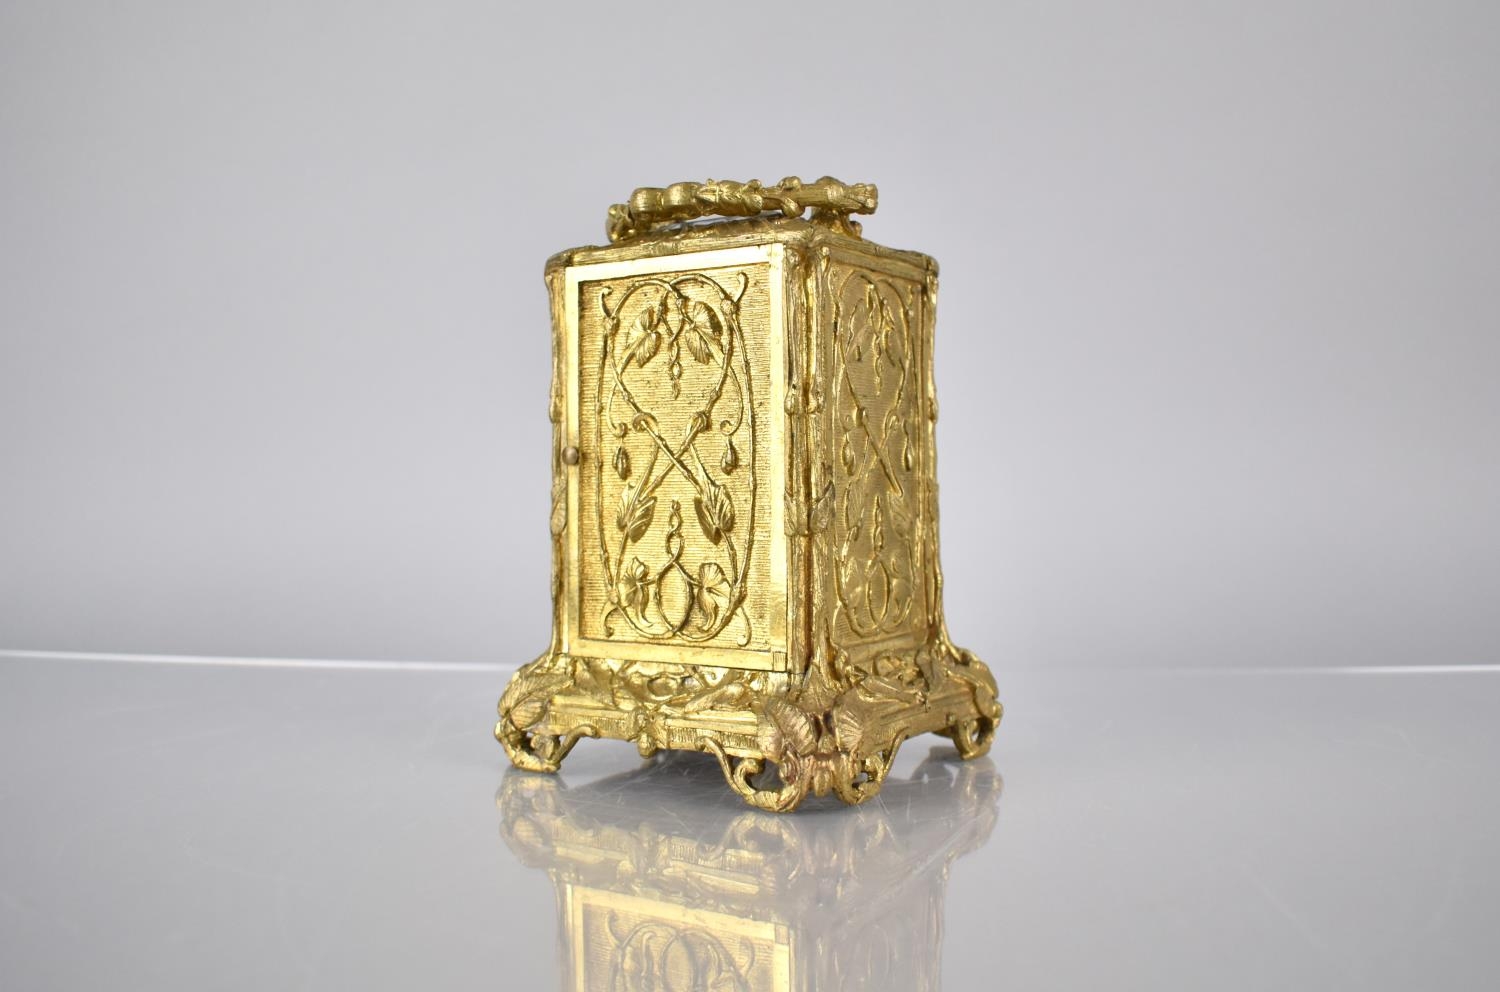 A Late 19th Century Gilt Brass Cased Carriage Alarm Clock by Hottot Paris, The Case with Moulded - Image 4 of 6